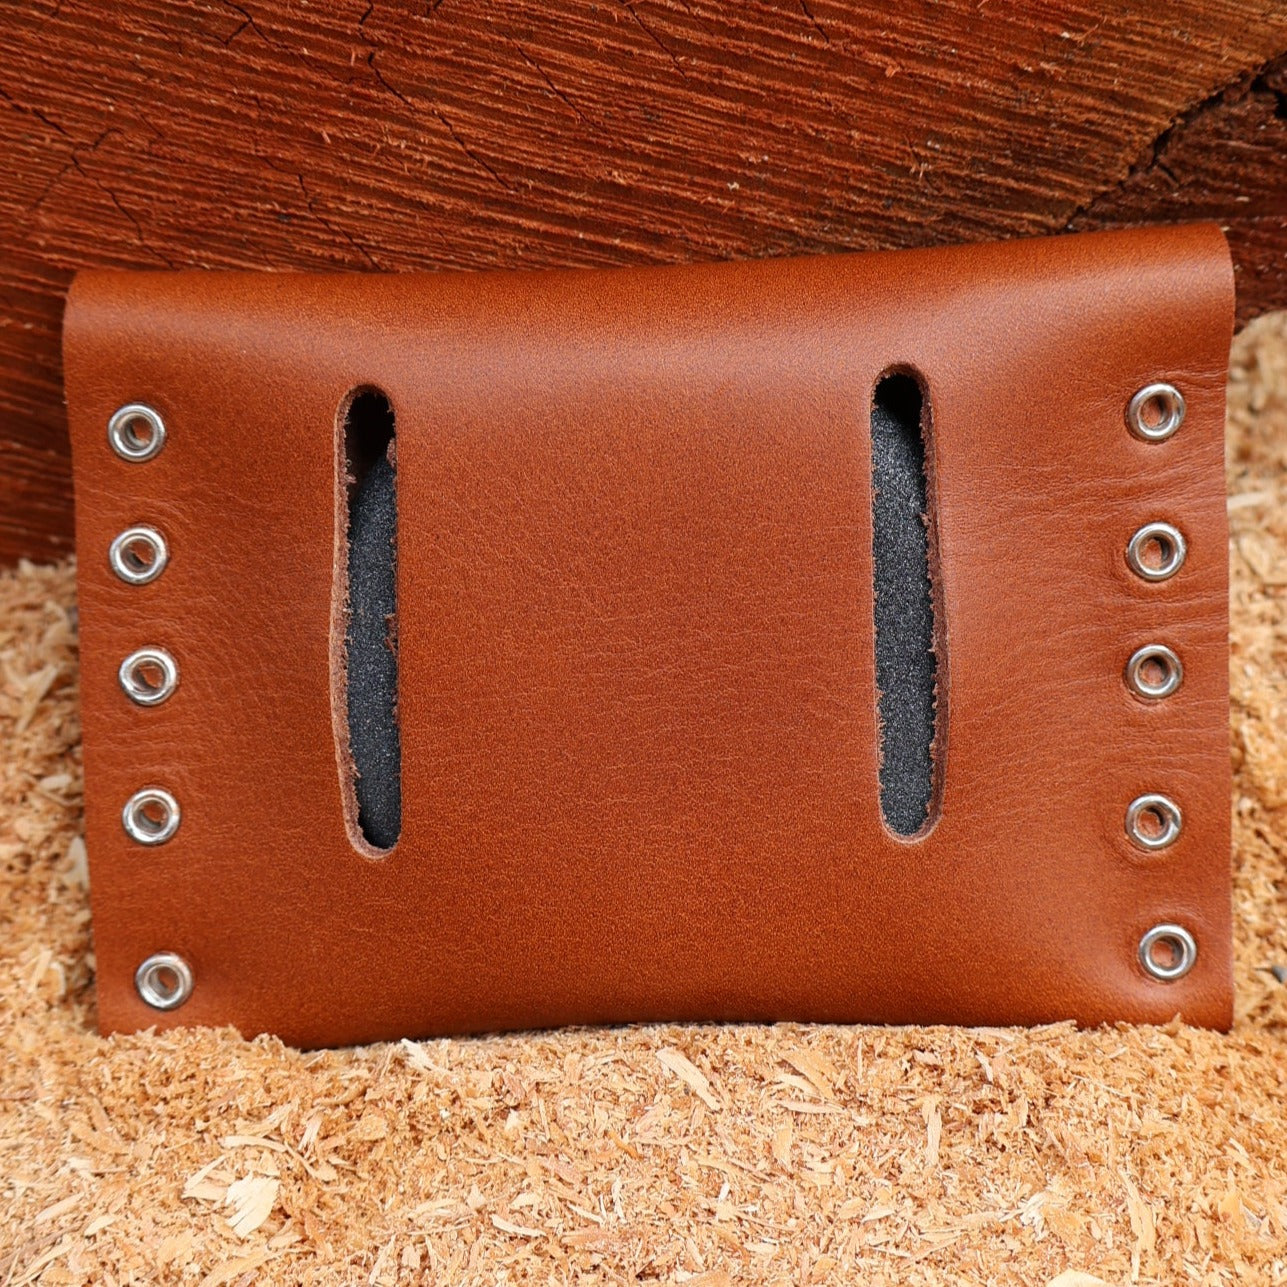 Small Sharpening Stone in Tan Leather Pouch (Belt Mountable)